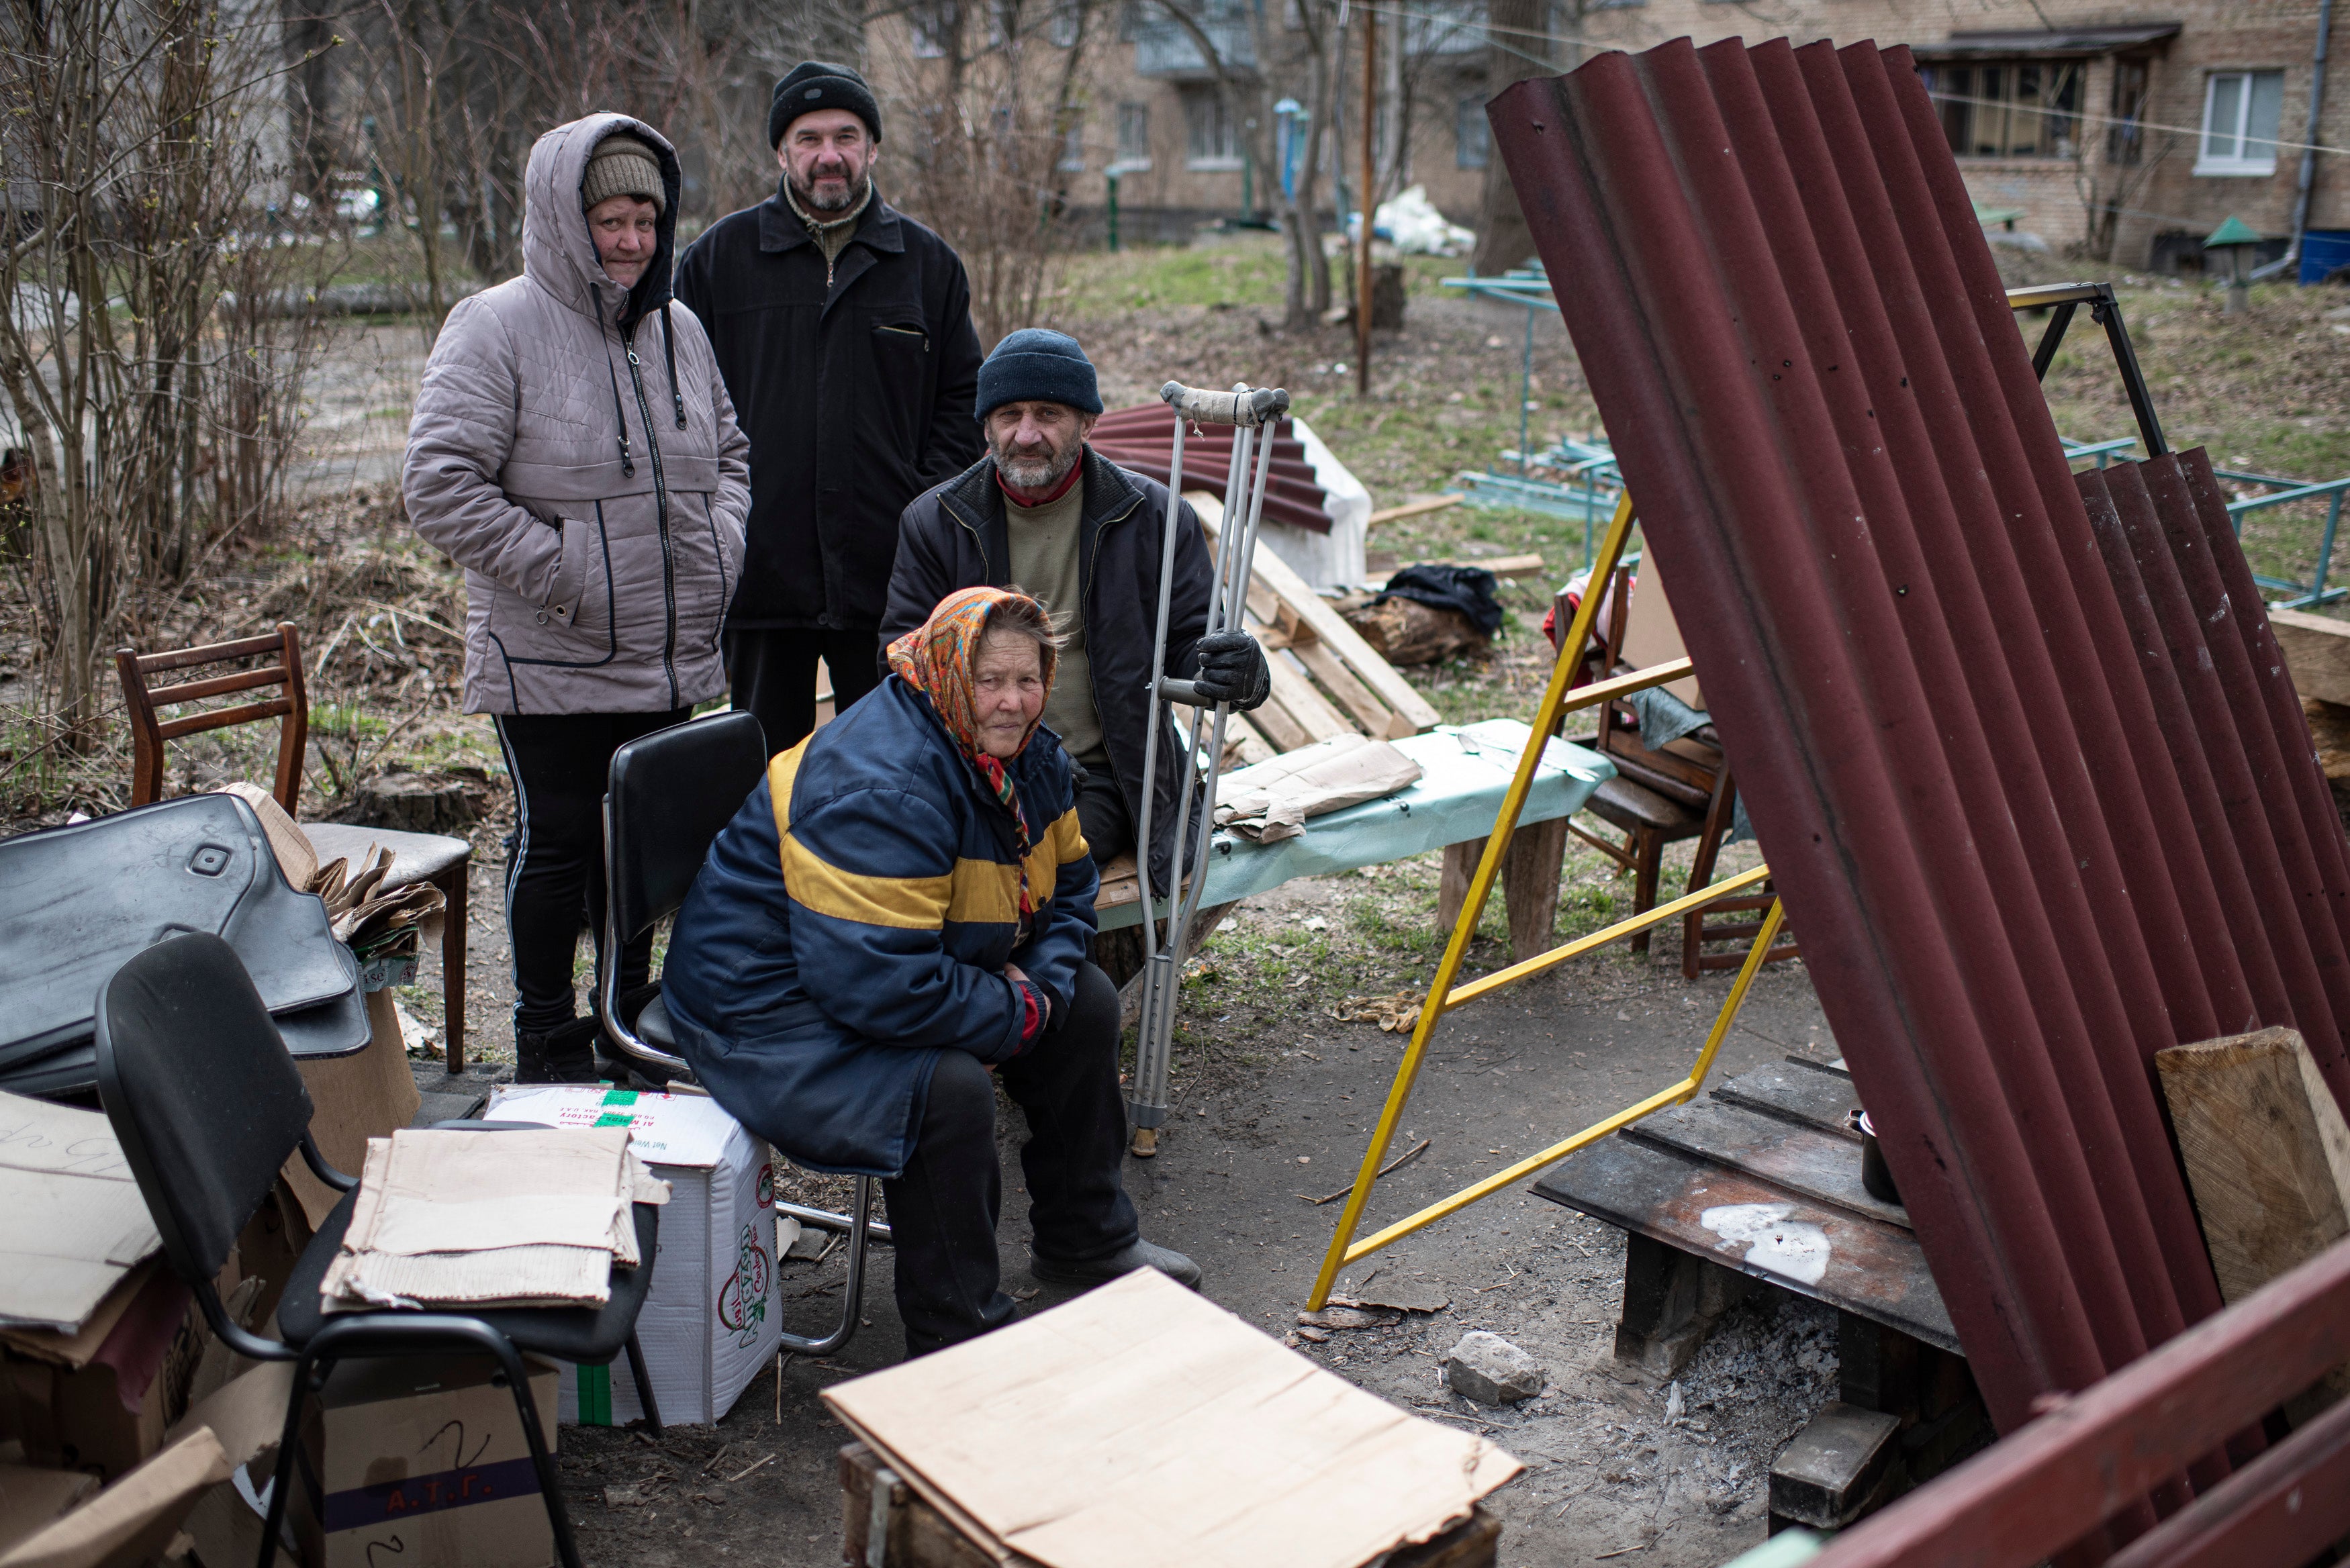 Residents sit by a makeshift stove next to their apartment building in Bucha, Ukraine. The Ukrainian government has accused Russian forces of committing a "deliberate massacre" as they occupied and eventually retreated from Bucha